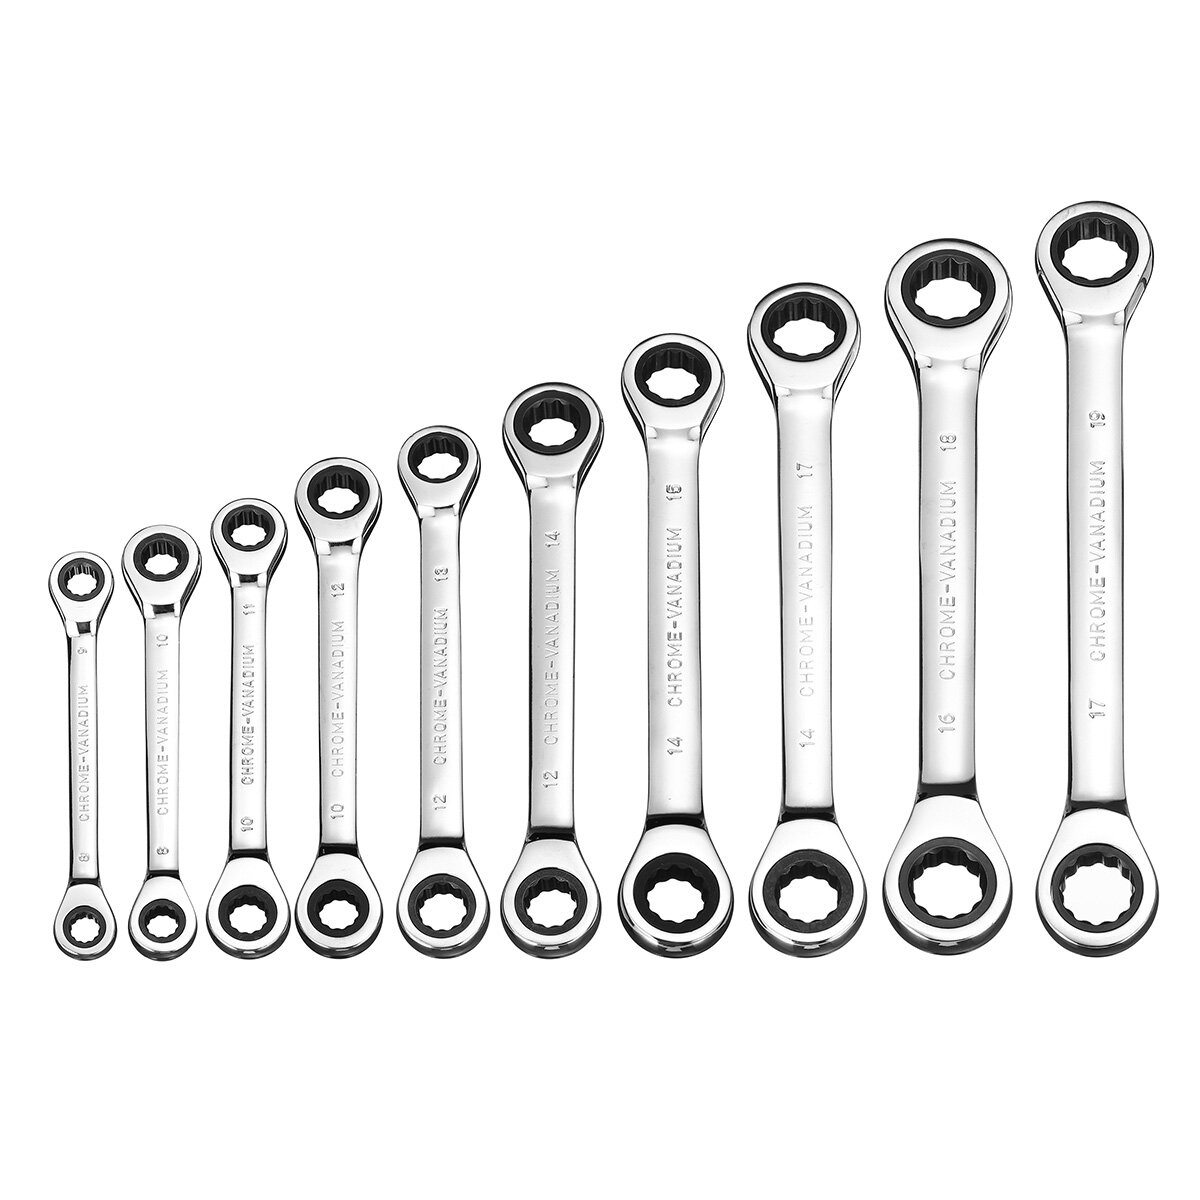 8-19mm Steel Metric Fixed Head Ratchet Spanner Wrench Double End Ring Tool